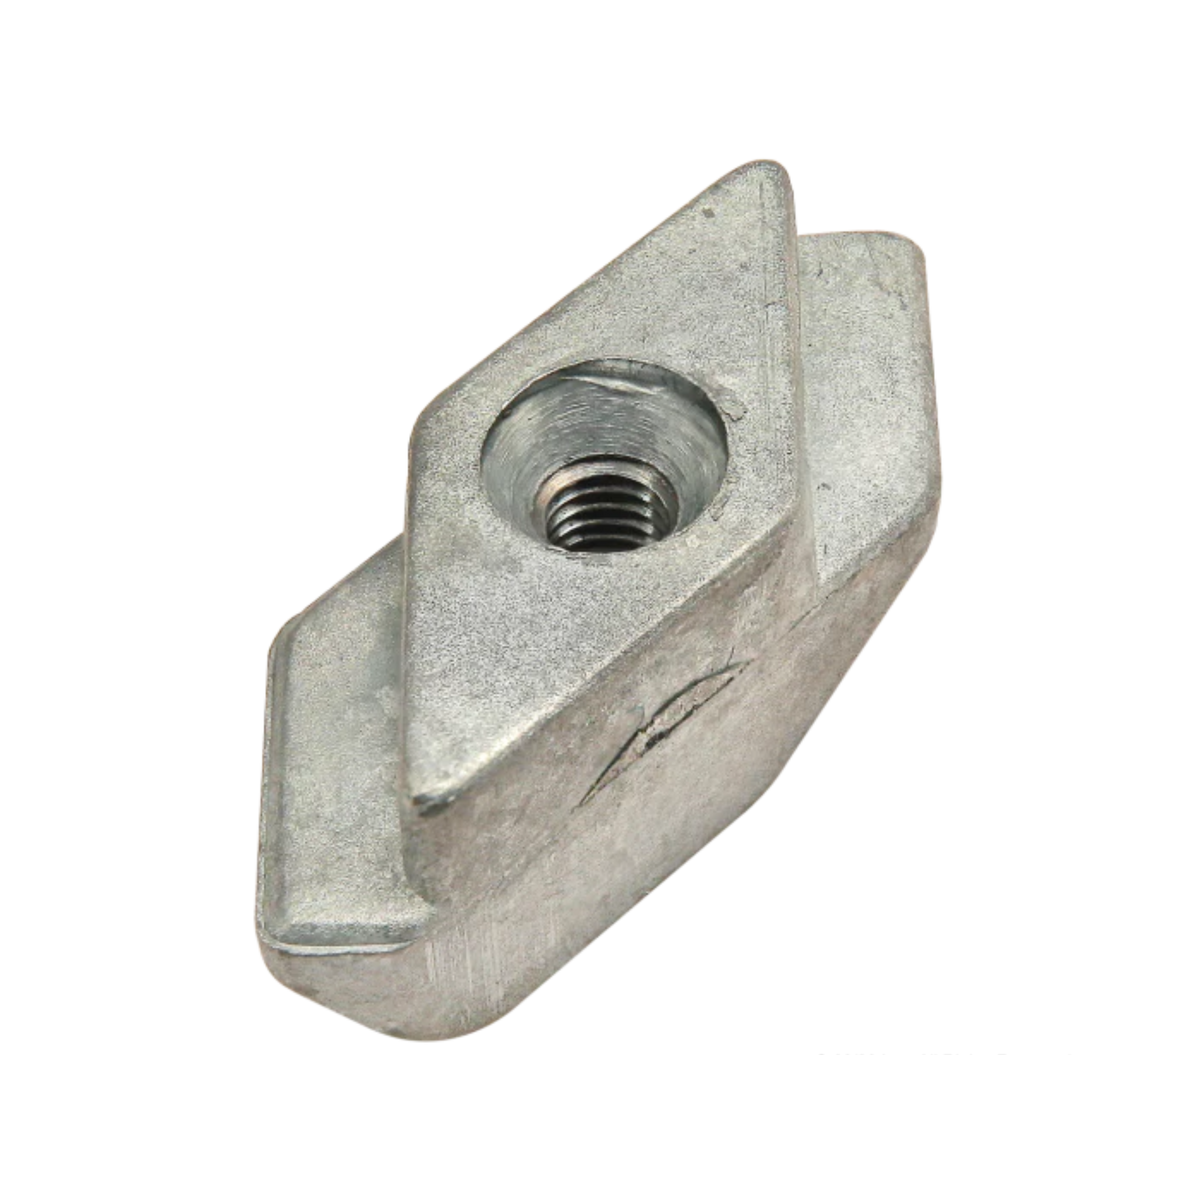 tall metal diamond shaped t-nut with a threaded hole in the center